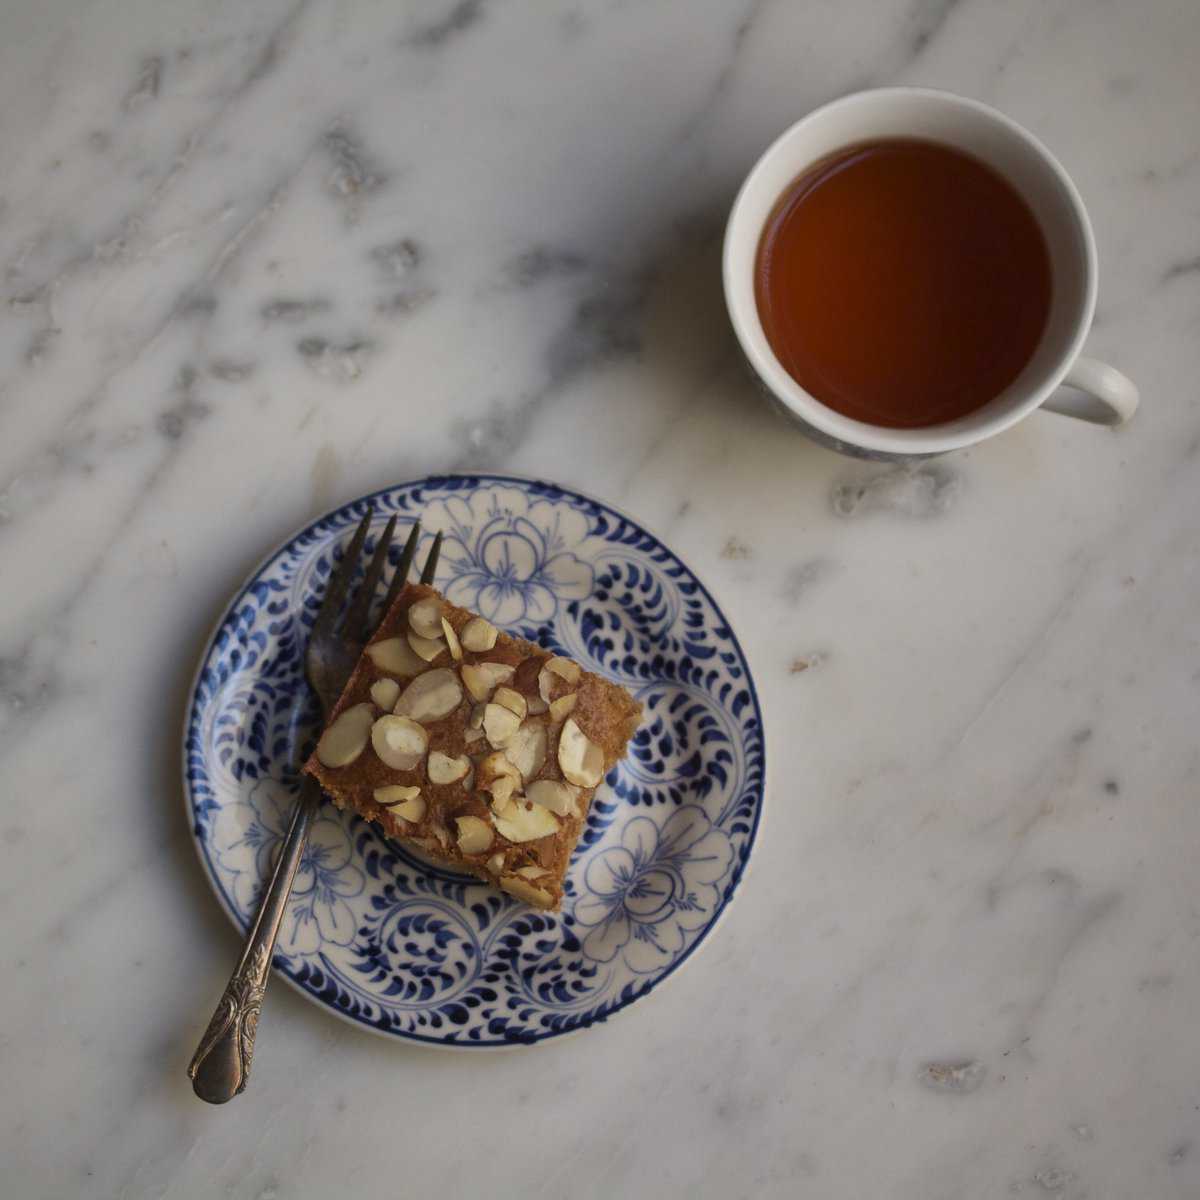 A piece of spelt honey cake on a plate with a fork and a cup of tea next to it.